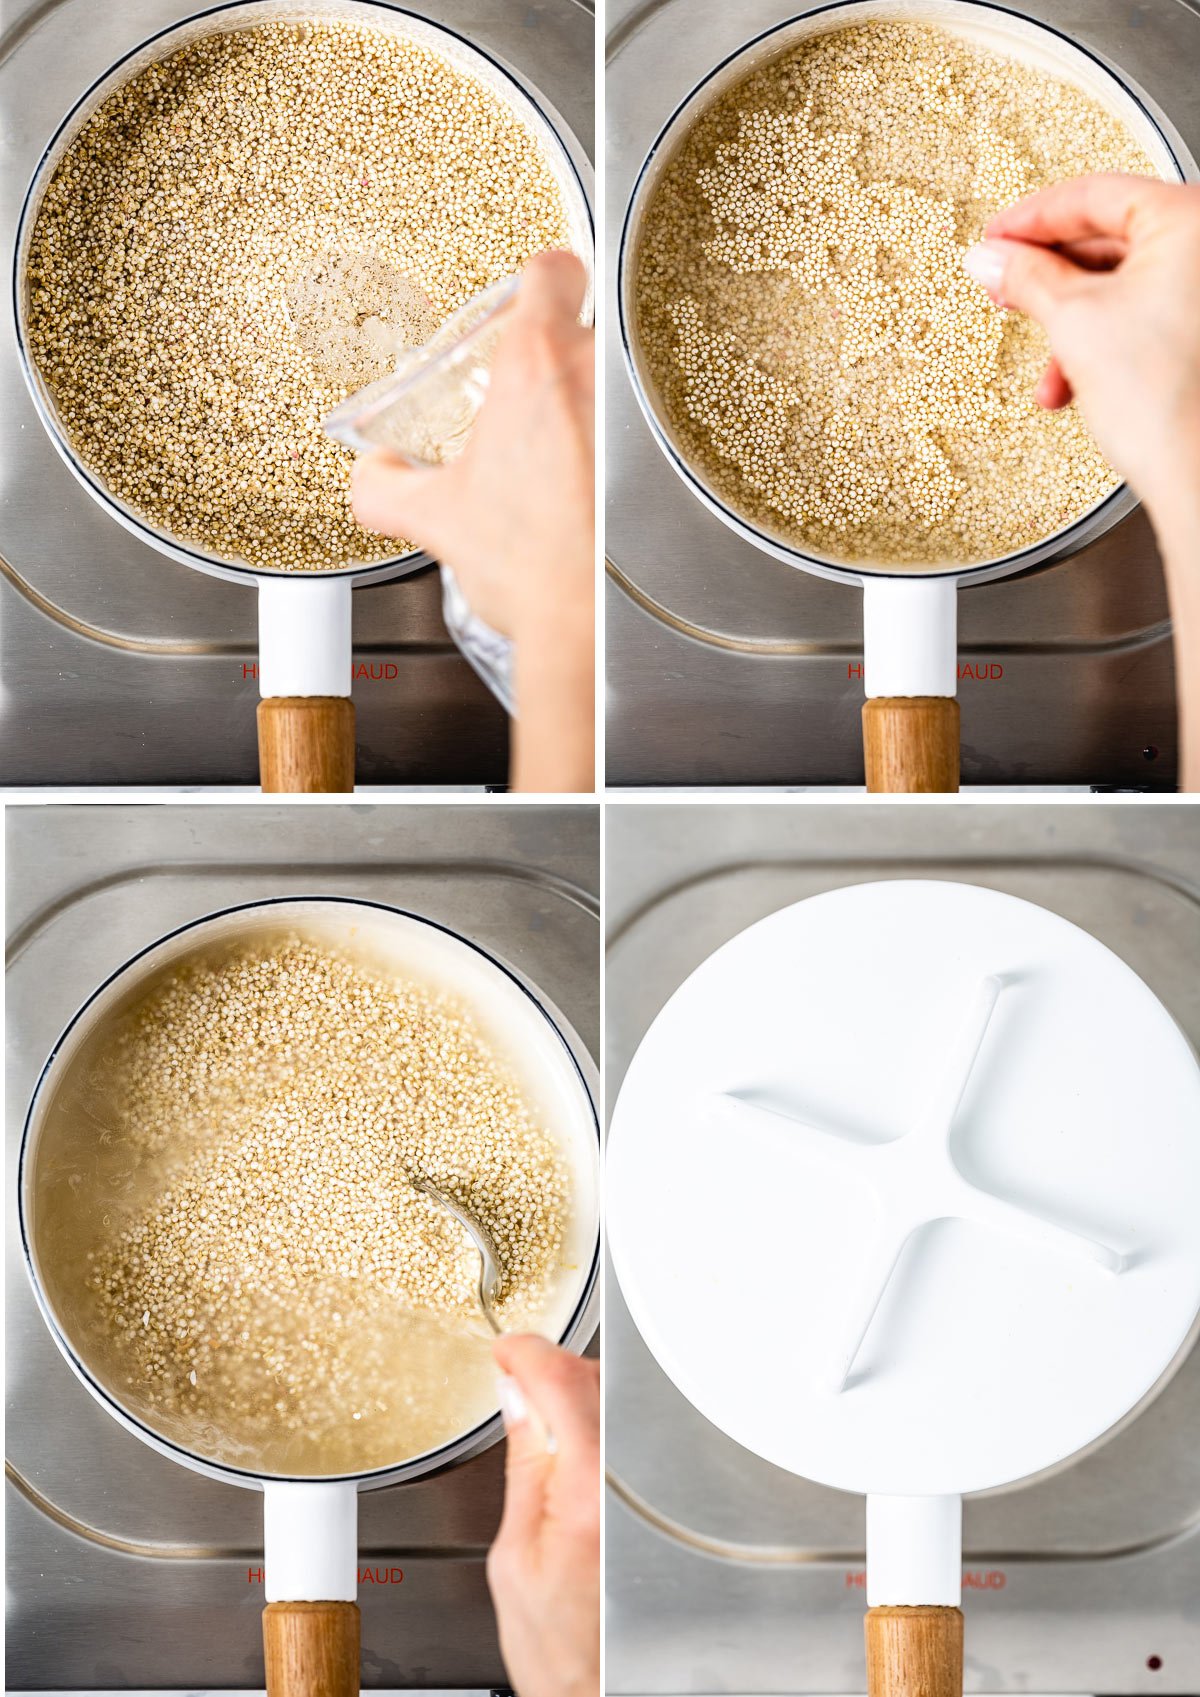 Quinoa cooking instructions step by step in four photos